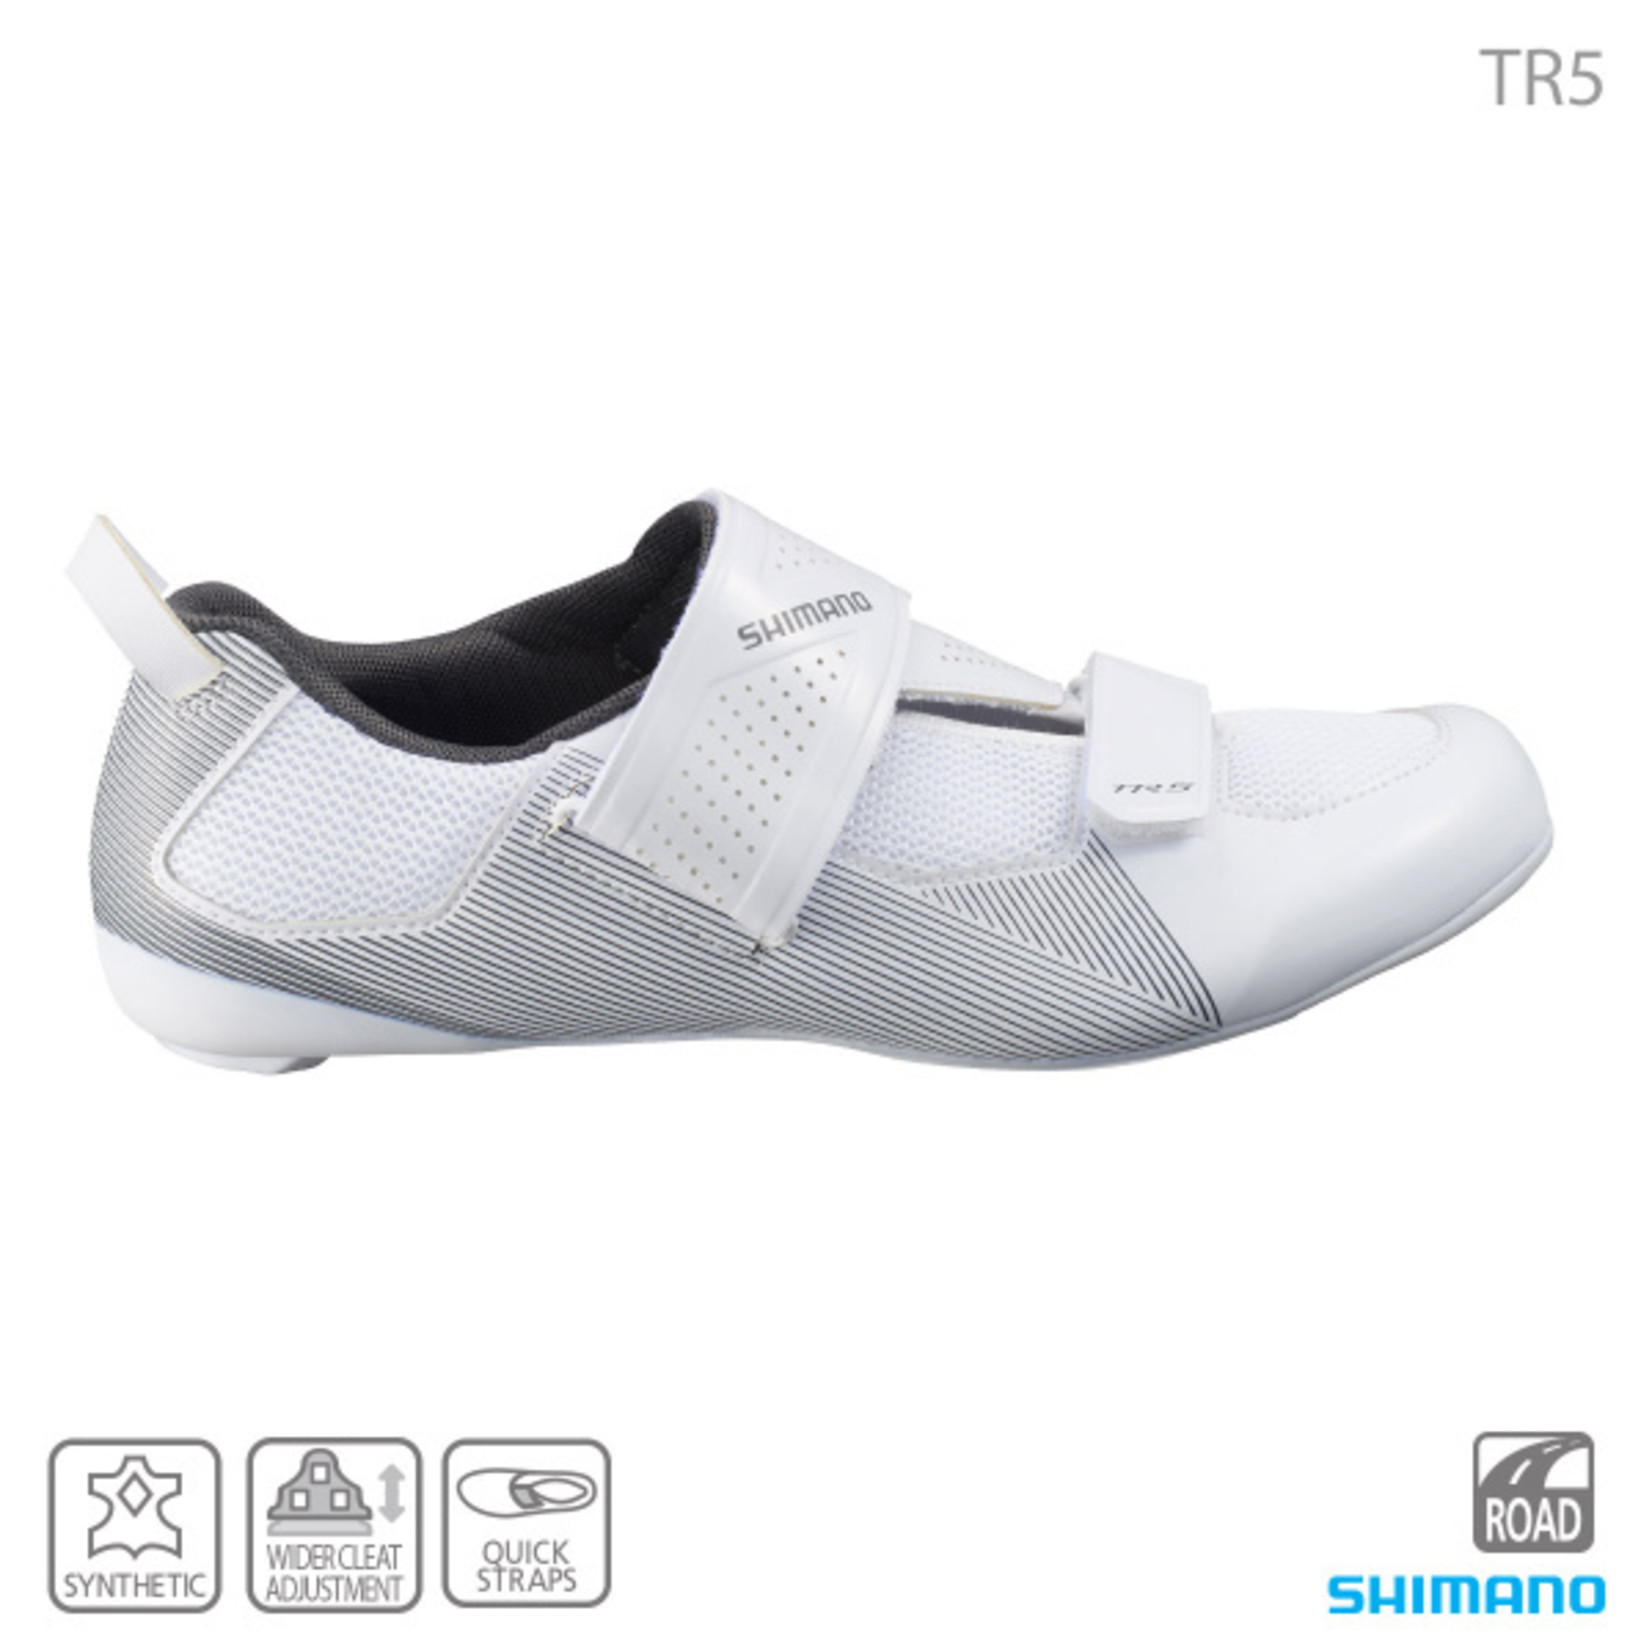 Shimano Shimano Sh-TR501 Triathlon Shoes - White Advanced Fit And Performance Technology